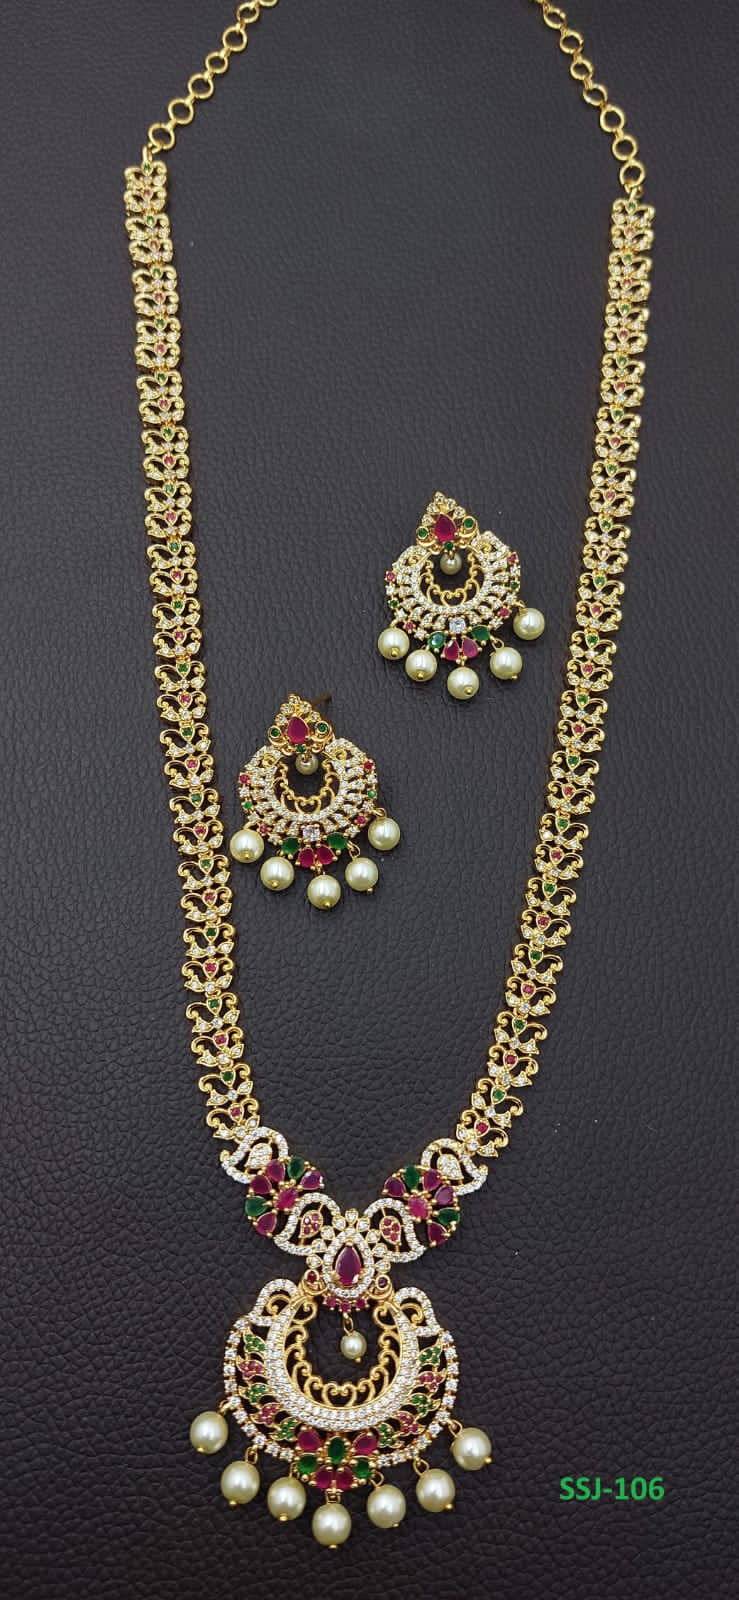 Classic American Diamond Stone Jewelry Haram Long Necklace Set with Chandbali Earrings- Multicolor